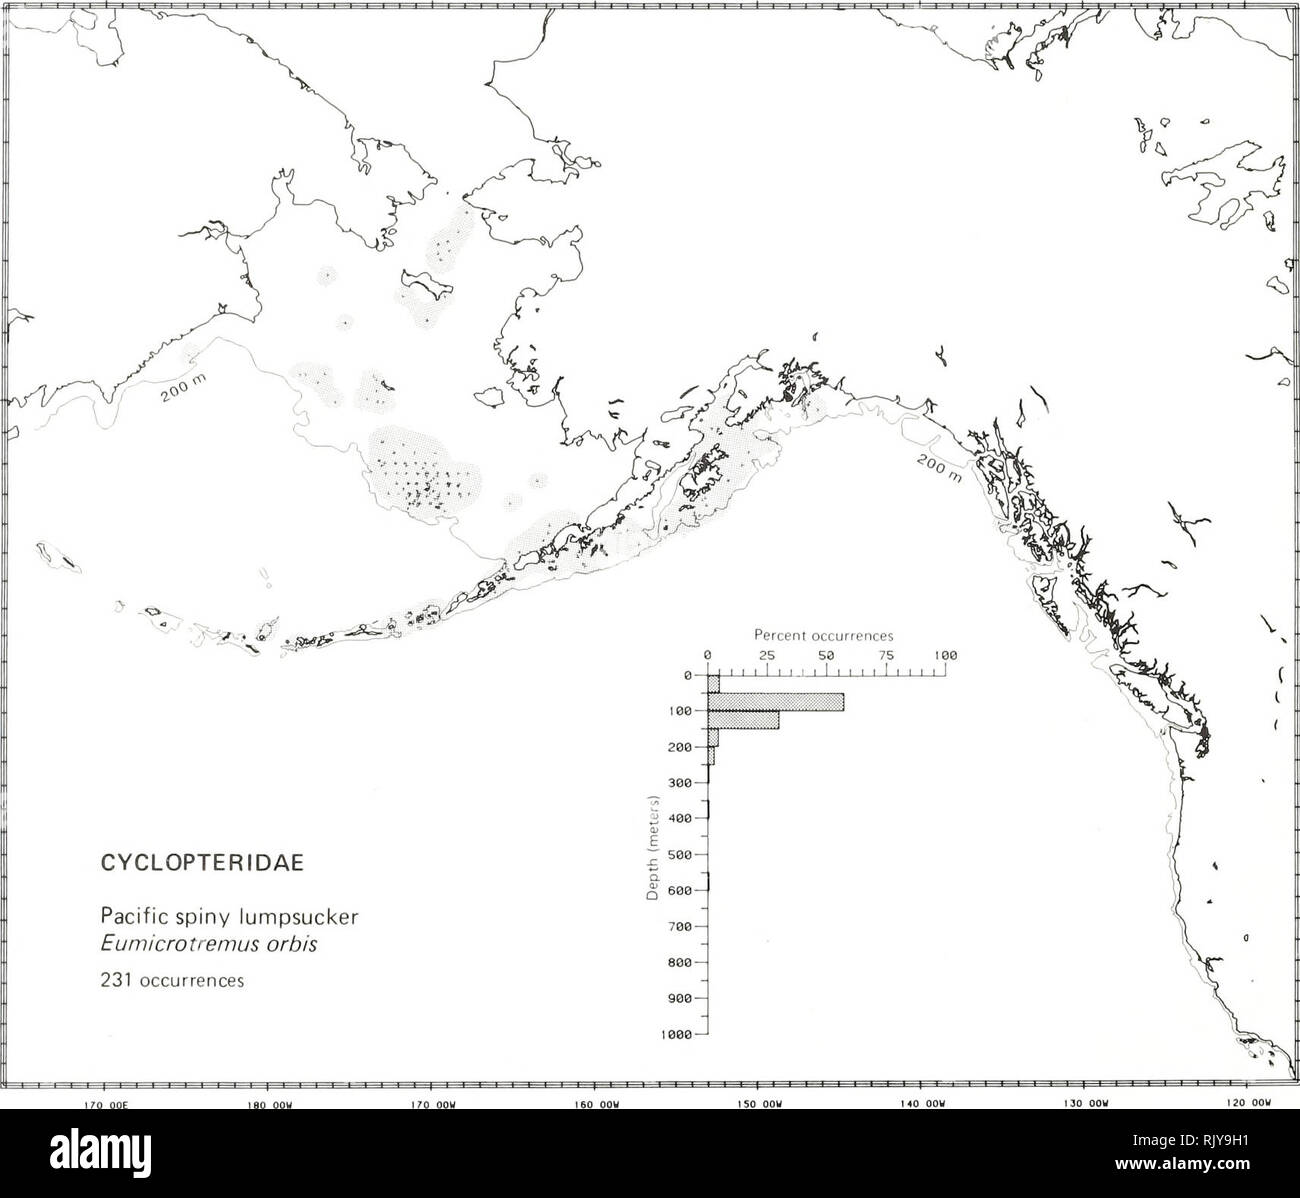 . Atlas and zoogeography of common fishes in the Bering Sea and Northeastern Pacific / M. James Allen, Gary B. Smith. Fishes Bering Sea Geographical distribution.. PACIFIC SPINY LUMPSUCKER, Eumicrotremus orbis (Giinther 1896) Cyclopteridae: Lumpfishes and Snailfishes Literature Reported from Muroran, Hokkaido, Japan, and the Sea of Okhotsk to the Chukchi Sea, occurring west along the Aleutian Islands to Amchitka Island and east to Puget Sound, Washington (Ueno 1970; Quast and Hall 1972; Simenstad et al. 1977; Eschmeyer and Herald 1983), at depths of 0 to 240 m (Fedorov 1973a; Eschmeyer and Her Stock Photo